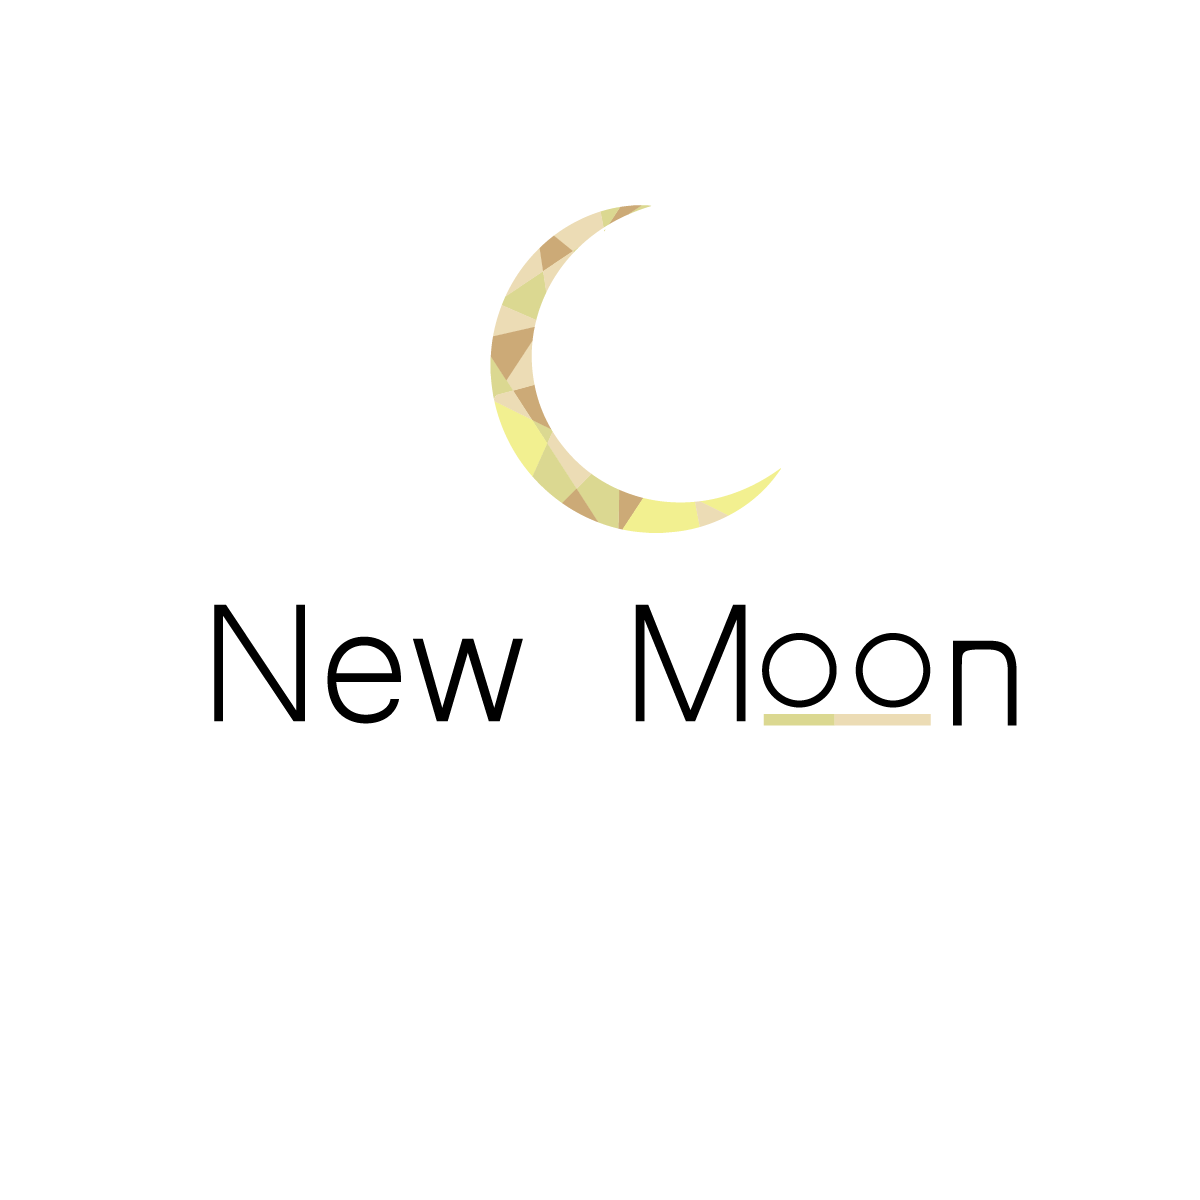 New Moon Logo - Upmarket, Personable, Clothing Logo Design for Pick any of the ...